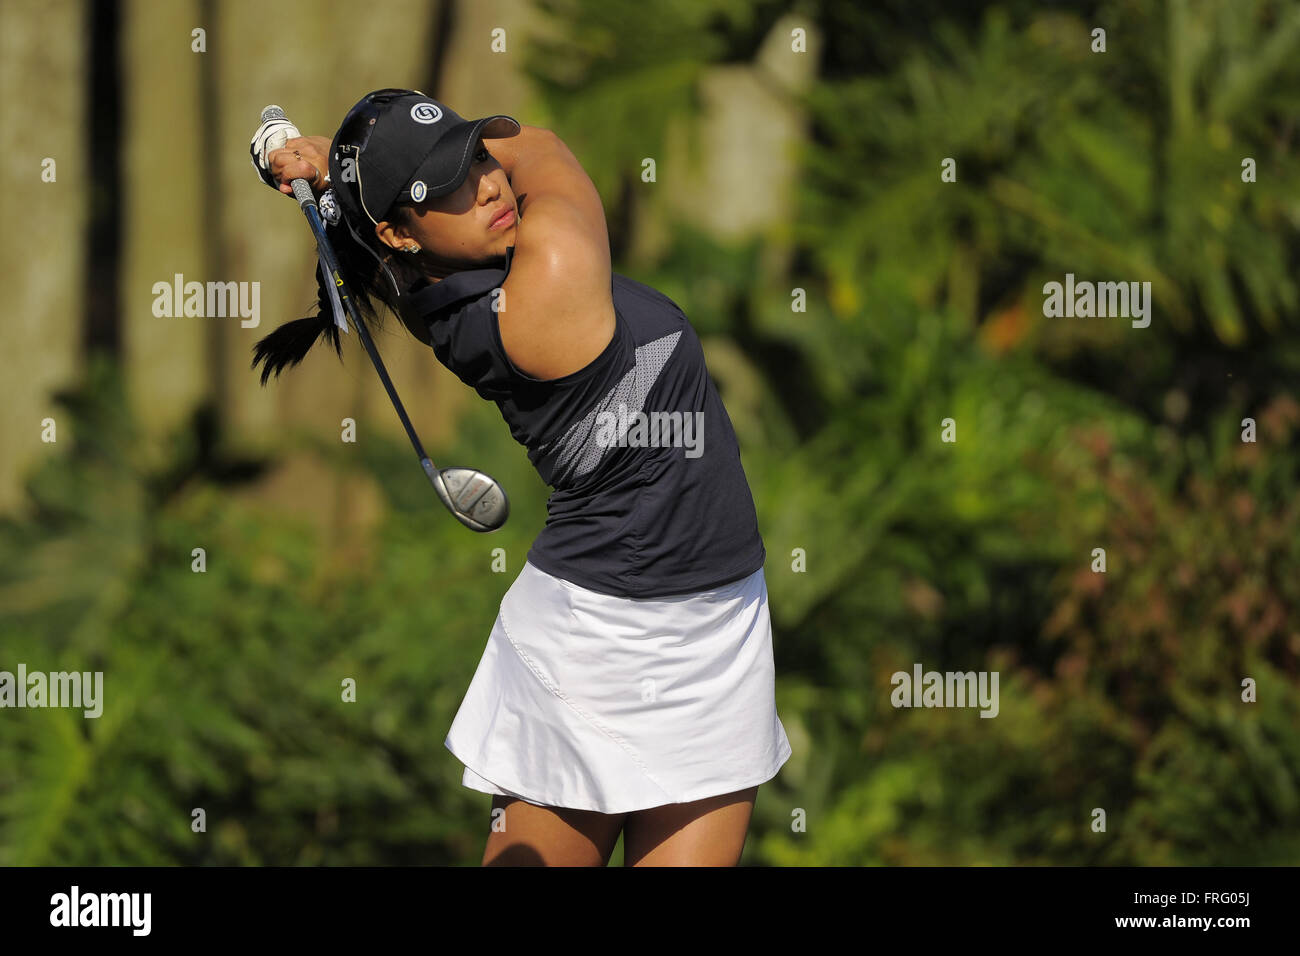 Lake Wales, FL, USA. 22nd Mar, 2014. Christine Wong during the second round of the Florida's Natural Charity Classic at Lake Wales Country Club on March 22, 2014 in Lake Wales, FL.ZUMA PRESS/Scott A. Miller © Scott A. Miller/ZUMA Wire/Alamy Live News Stock Photo